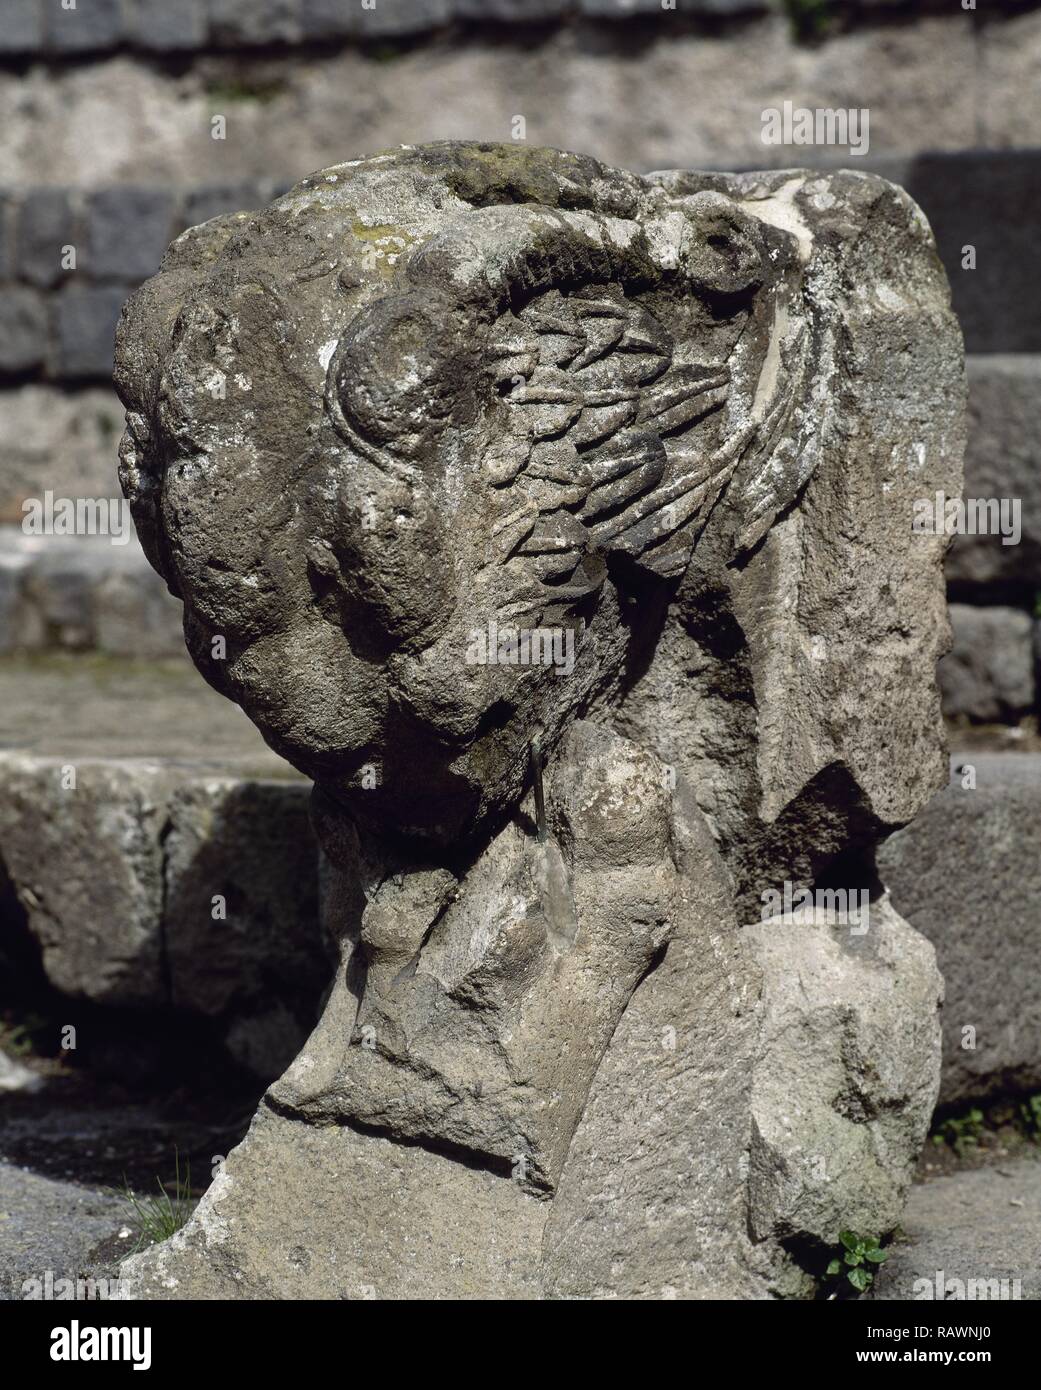 Italy. Pompeii. Ancient Roman city destroyed by the eruption of the  Vesuvius in 79 AD. Small Theatre or Odeon, built in 80 BC. Remains of a  balustrade with a winged gryphon (lion's